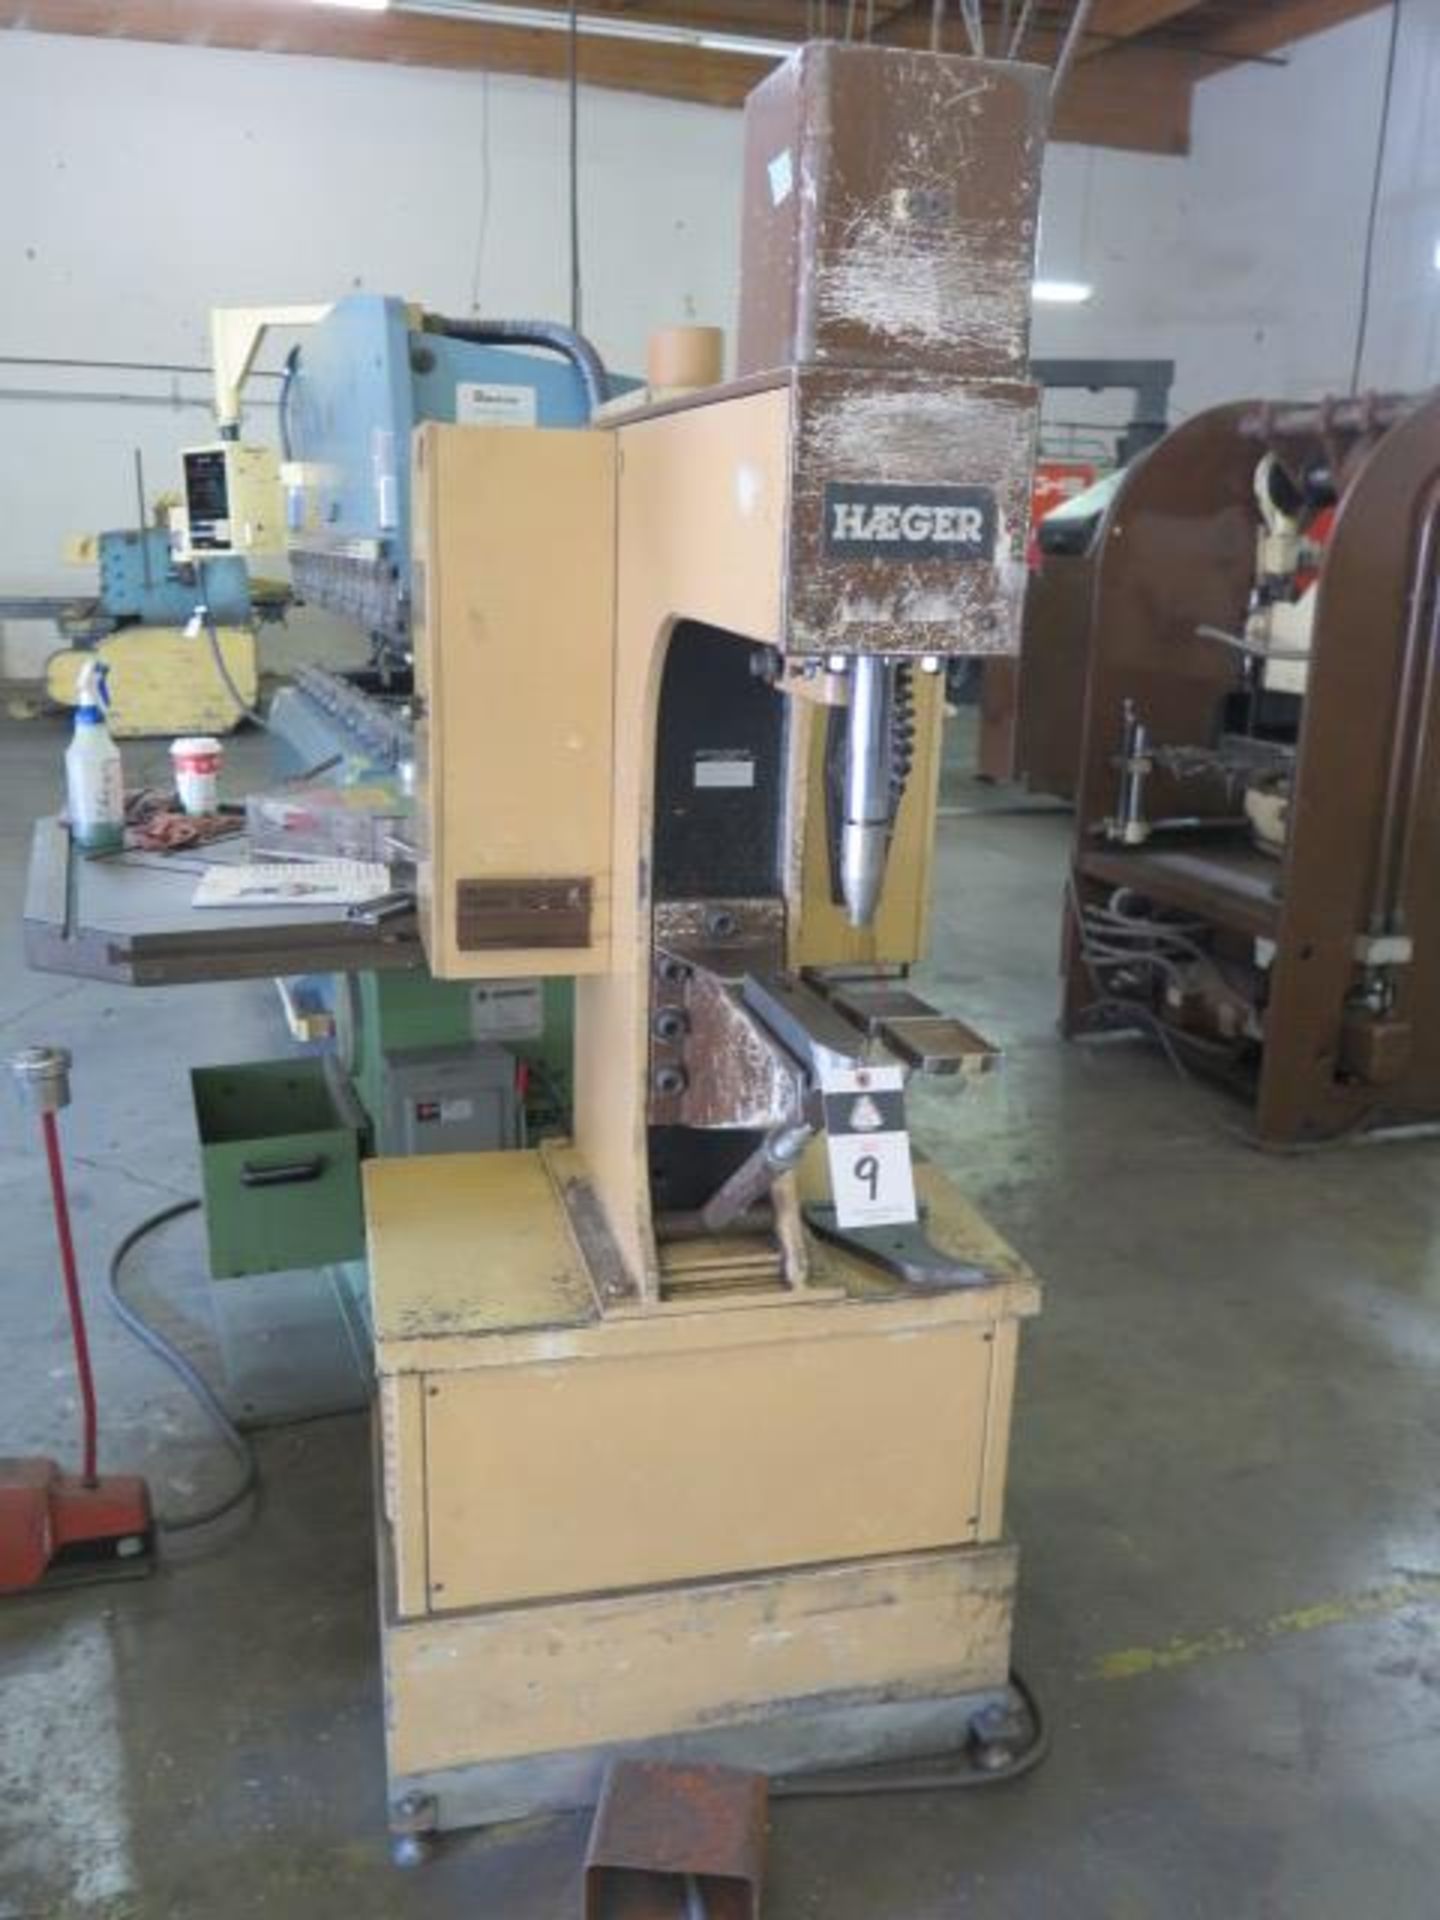 Haeger HP6-B 6 Ton x 18" Hardware Insertion Press s/n 211 (SOLD AS-IS - NO WARRANTY) - Image 2 of 8